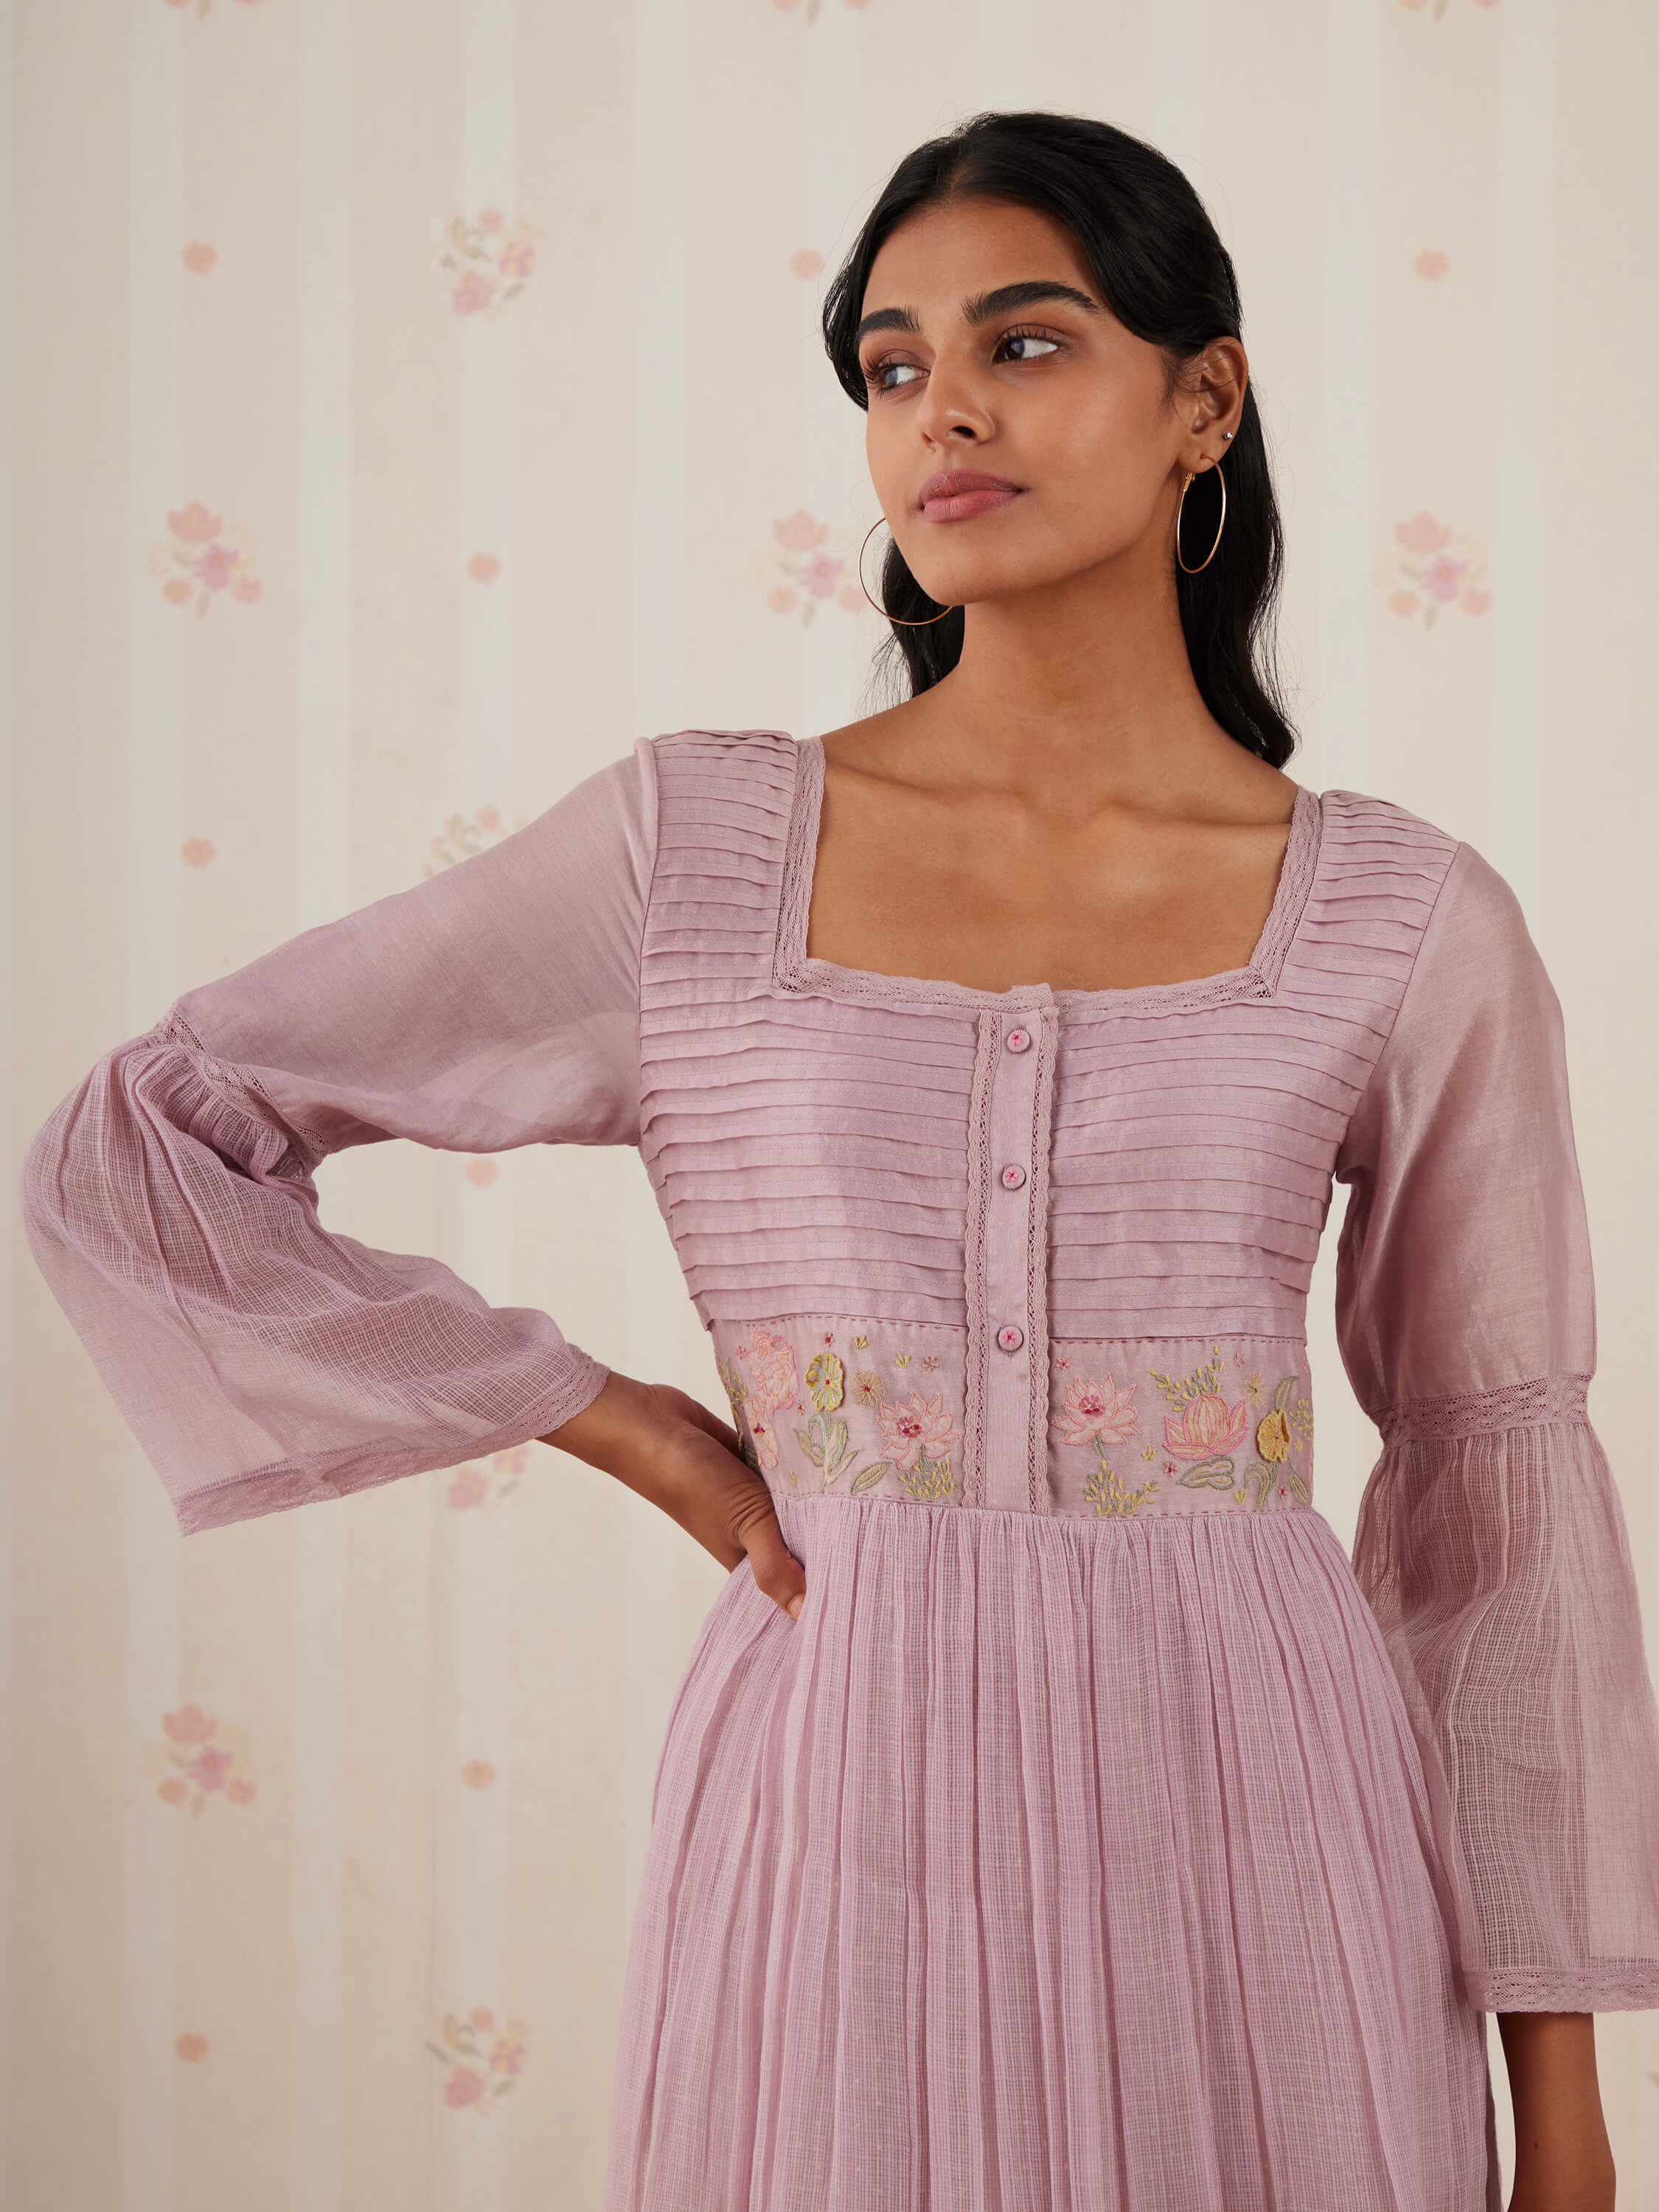 Woman in lilac pleated dress with floral embroidery and hoop earrings.